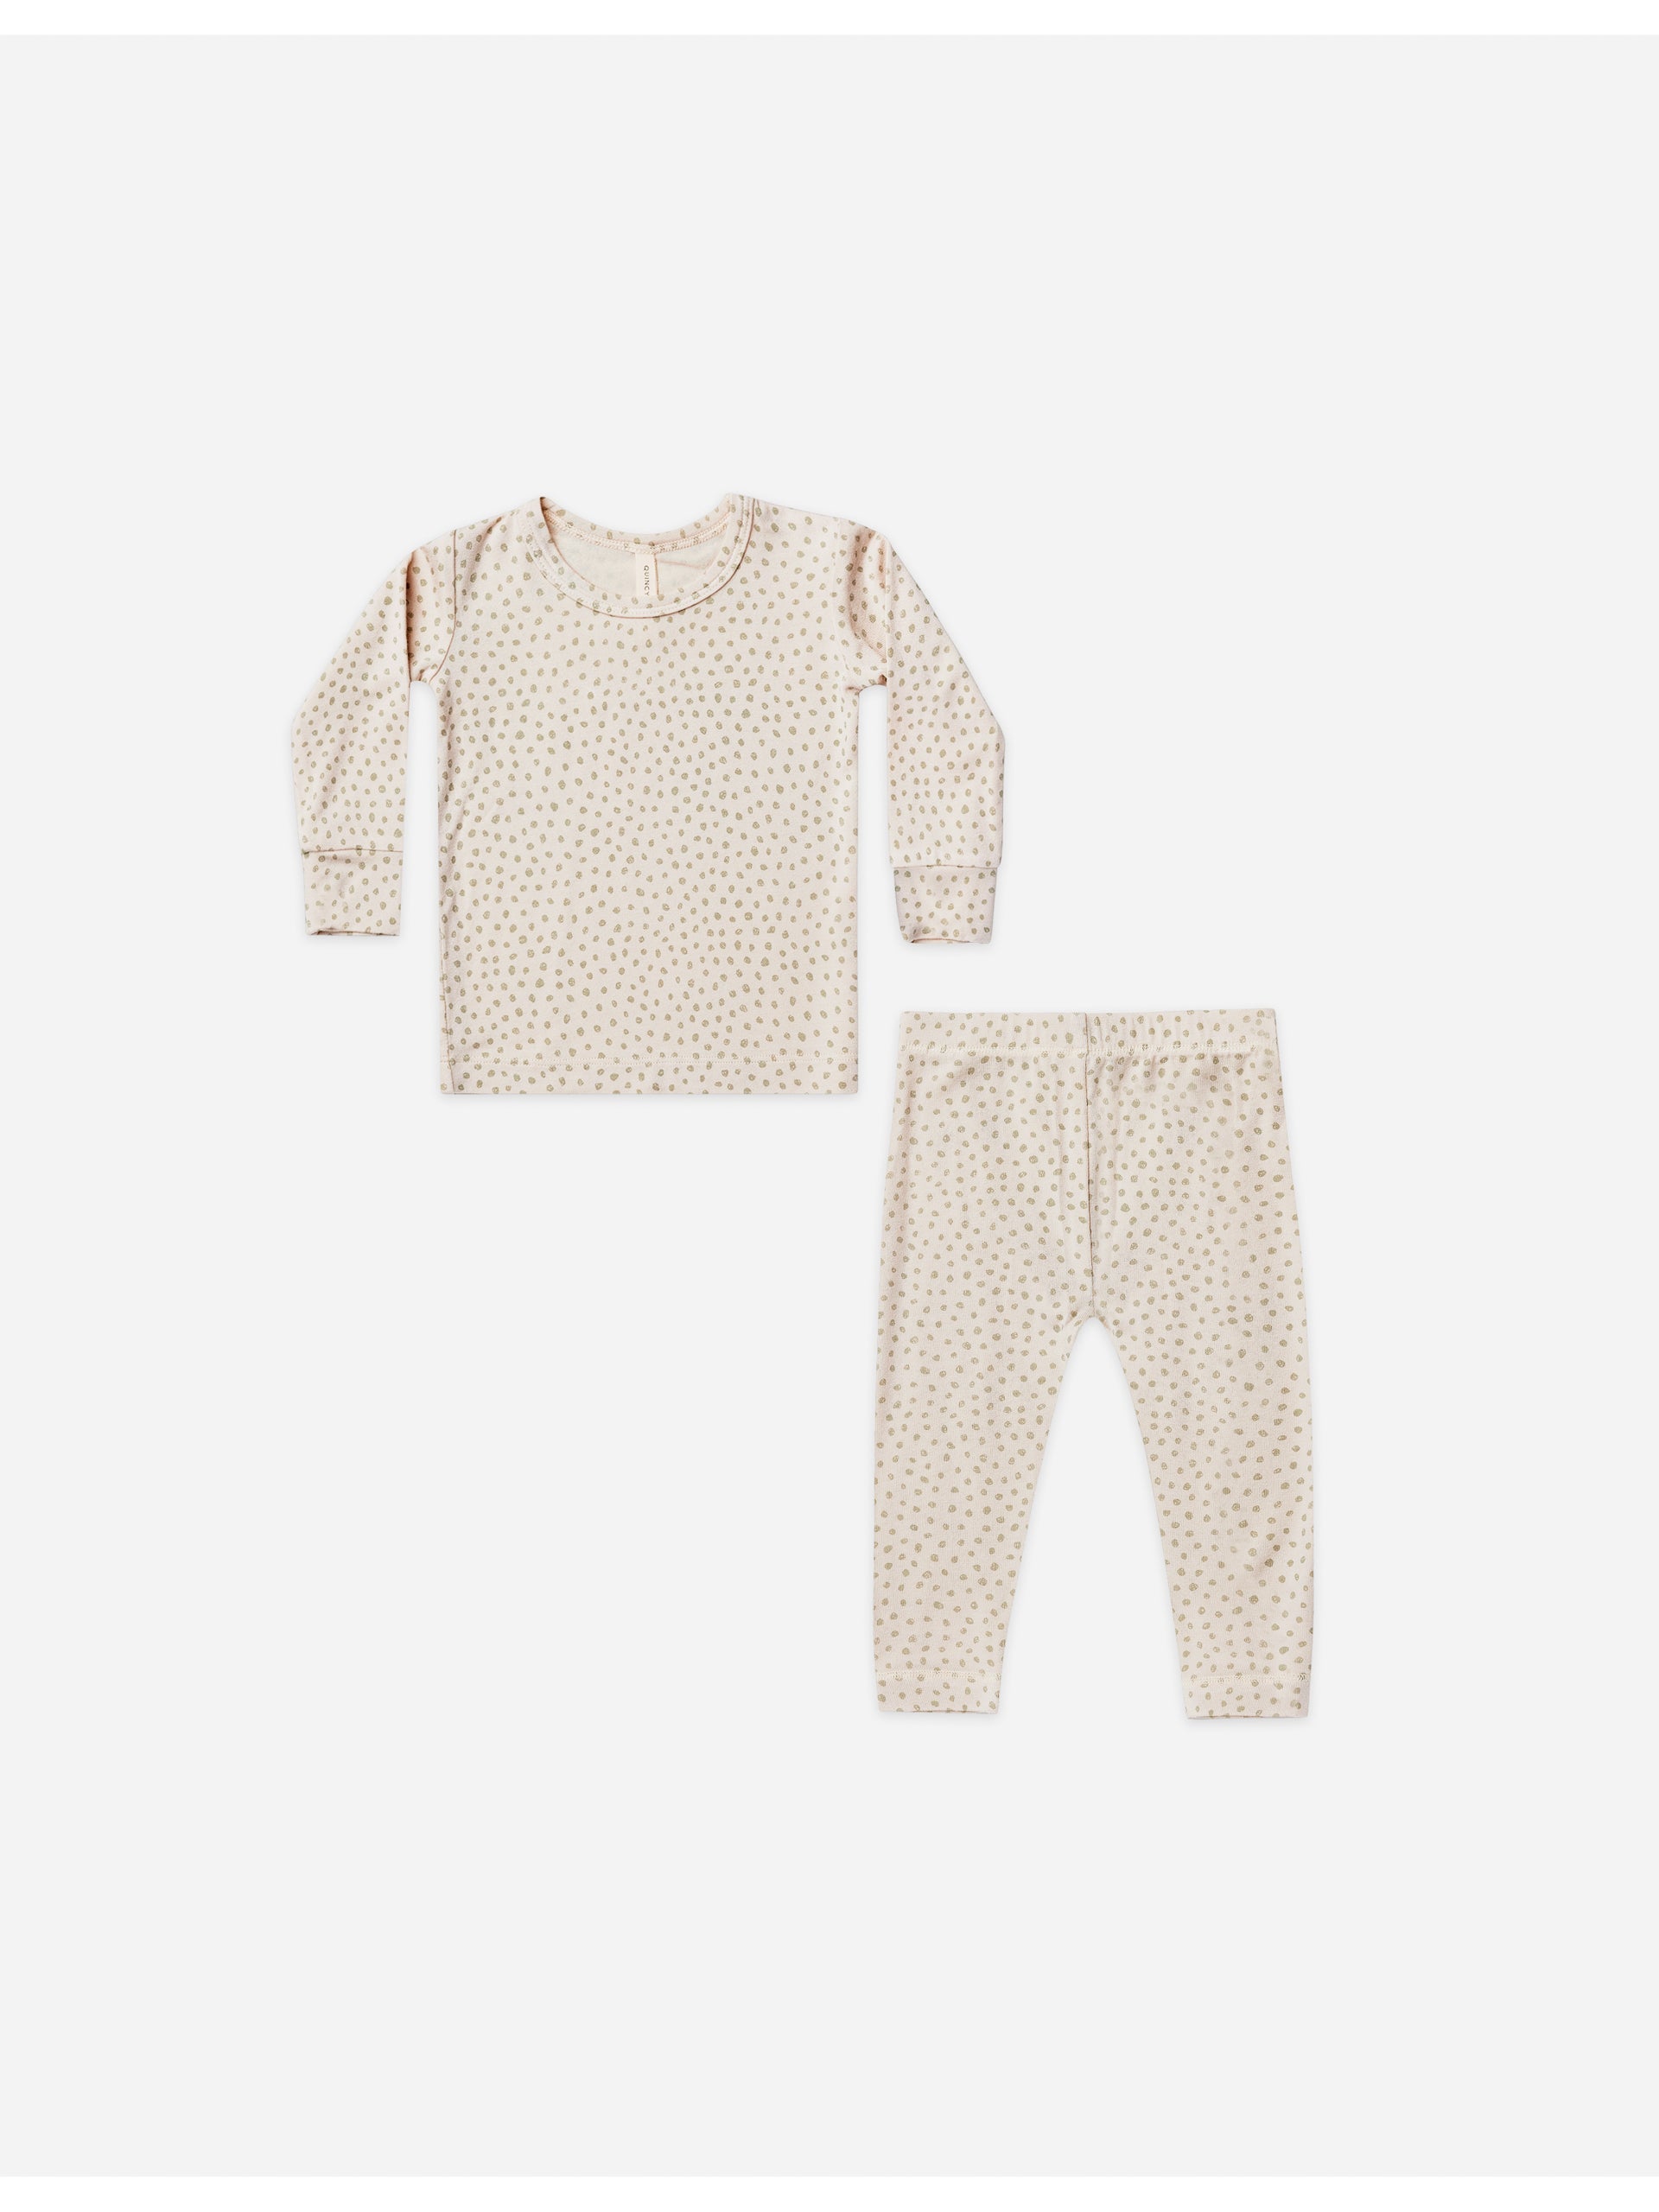 bamboo pajama set | speckles - Quincy Mae | Baby Basics | Baby Clothing | Organic Baby Clothes | Modern Baby Boy Clothes |